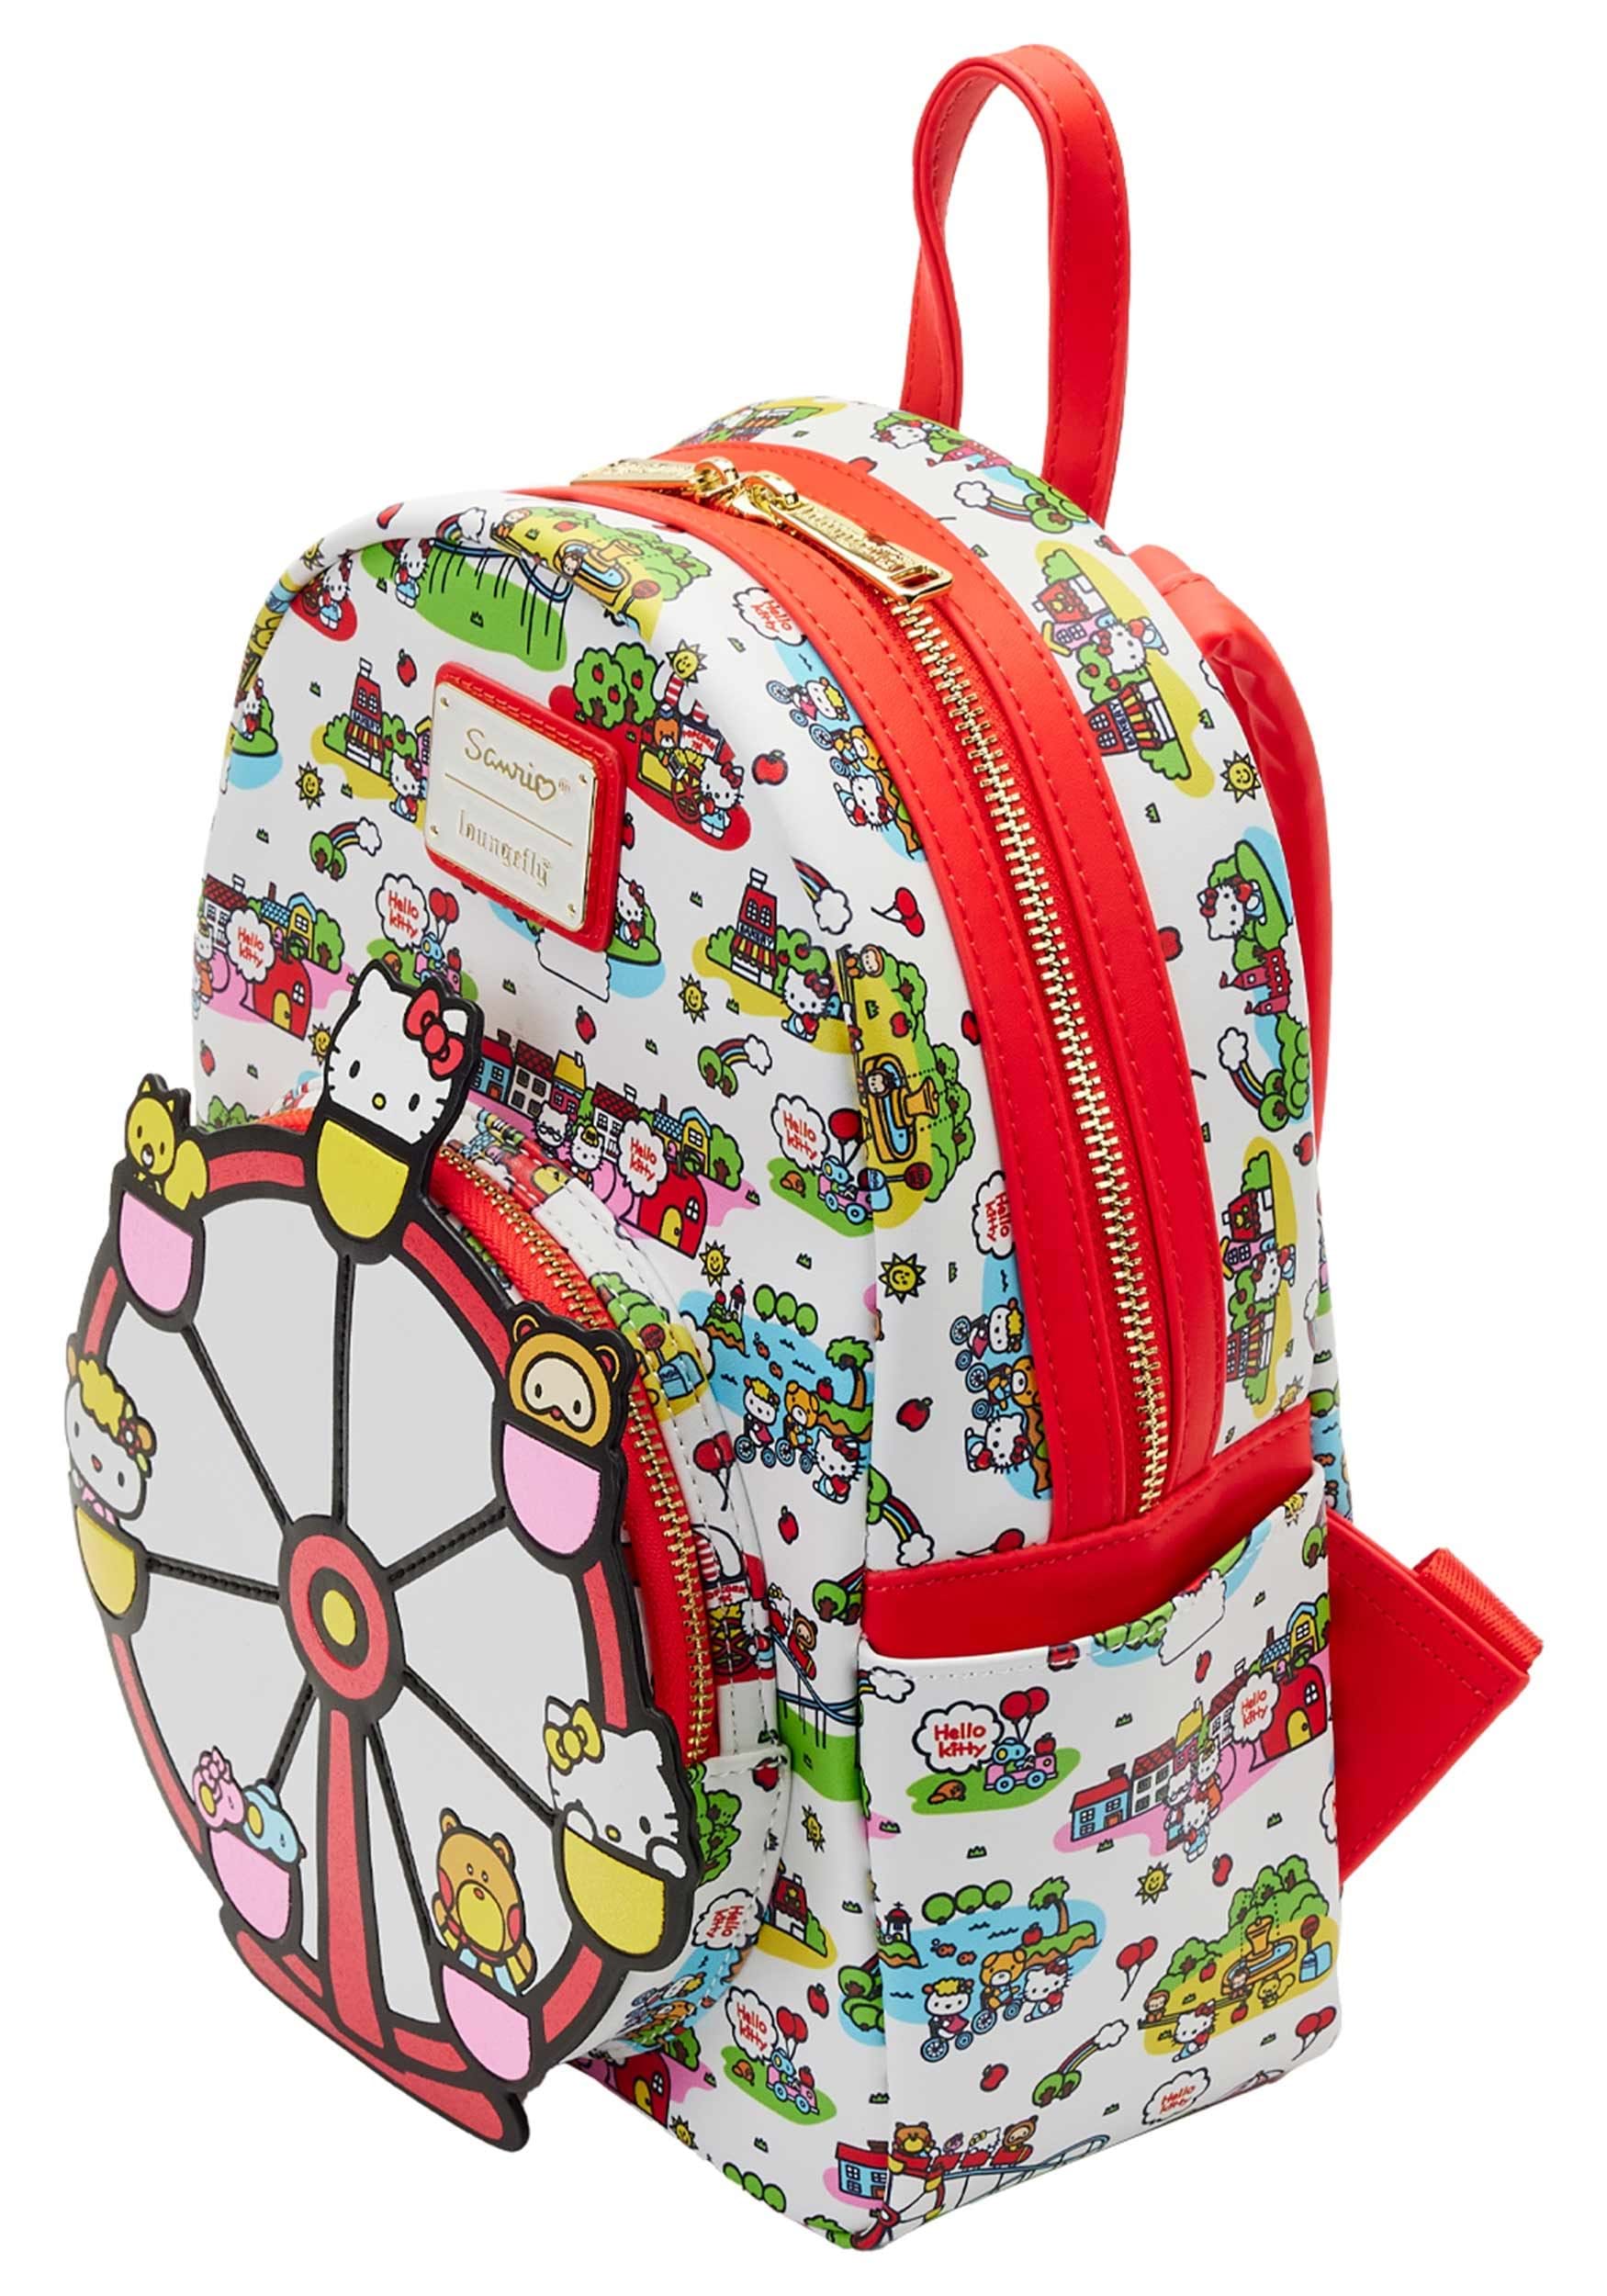 https://images.fun.com/products/89856/2-1-257494/loungefly-hello-kitty-friends-carnival-mini-backpack-alt-2.jpg